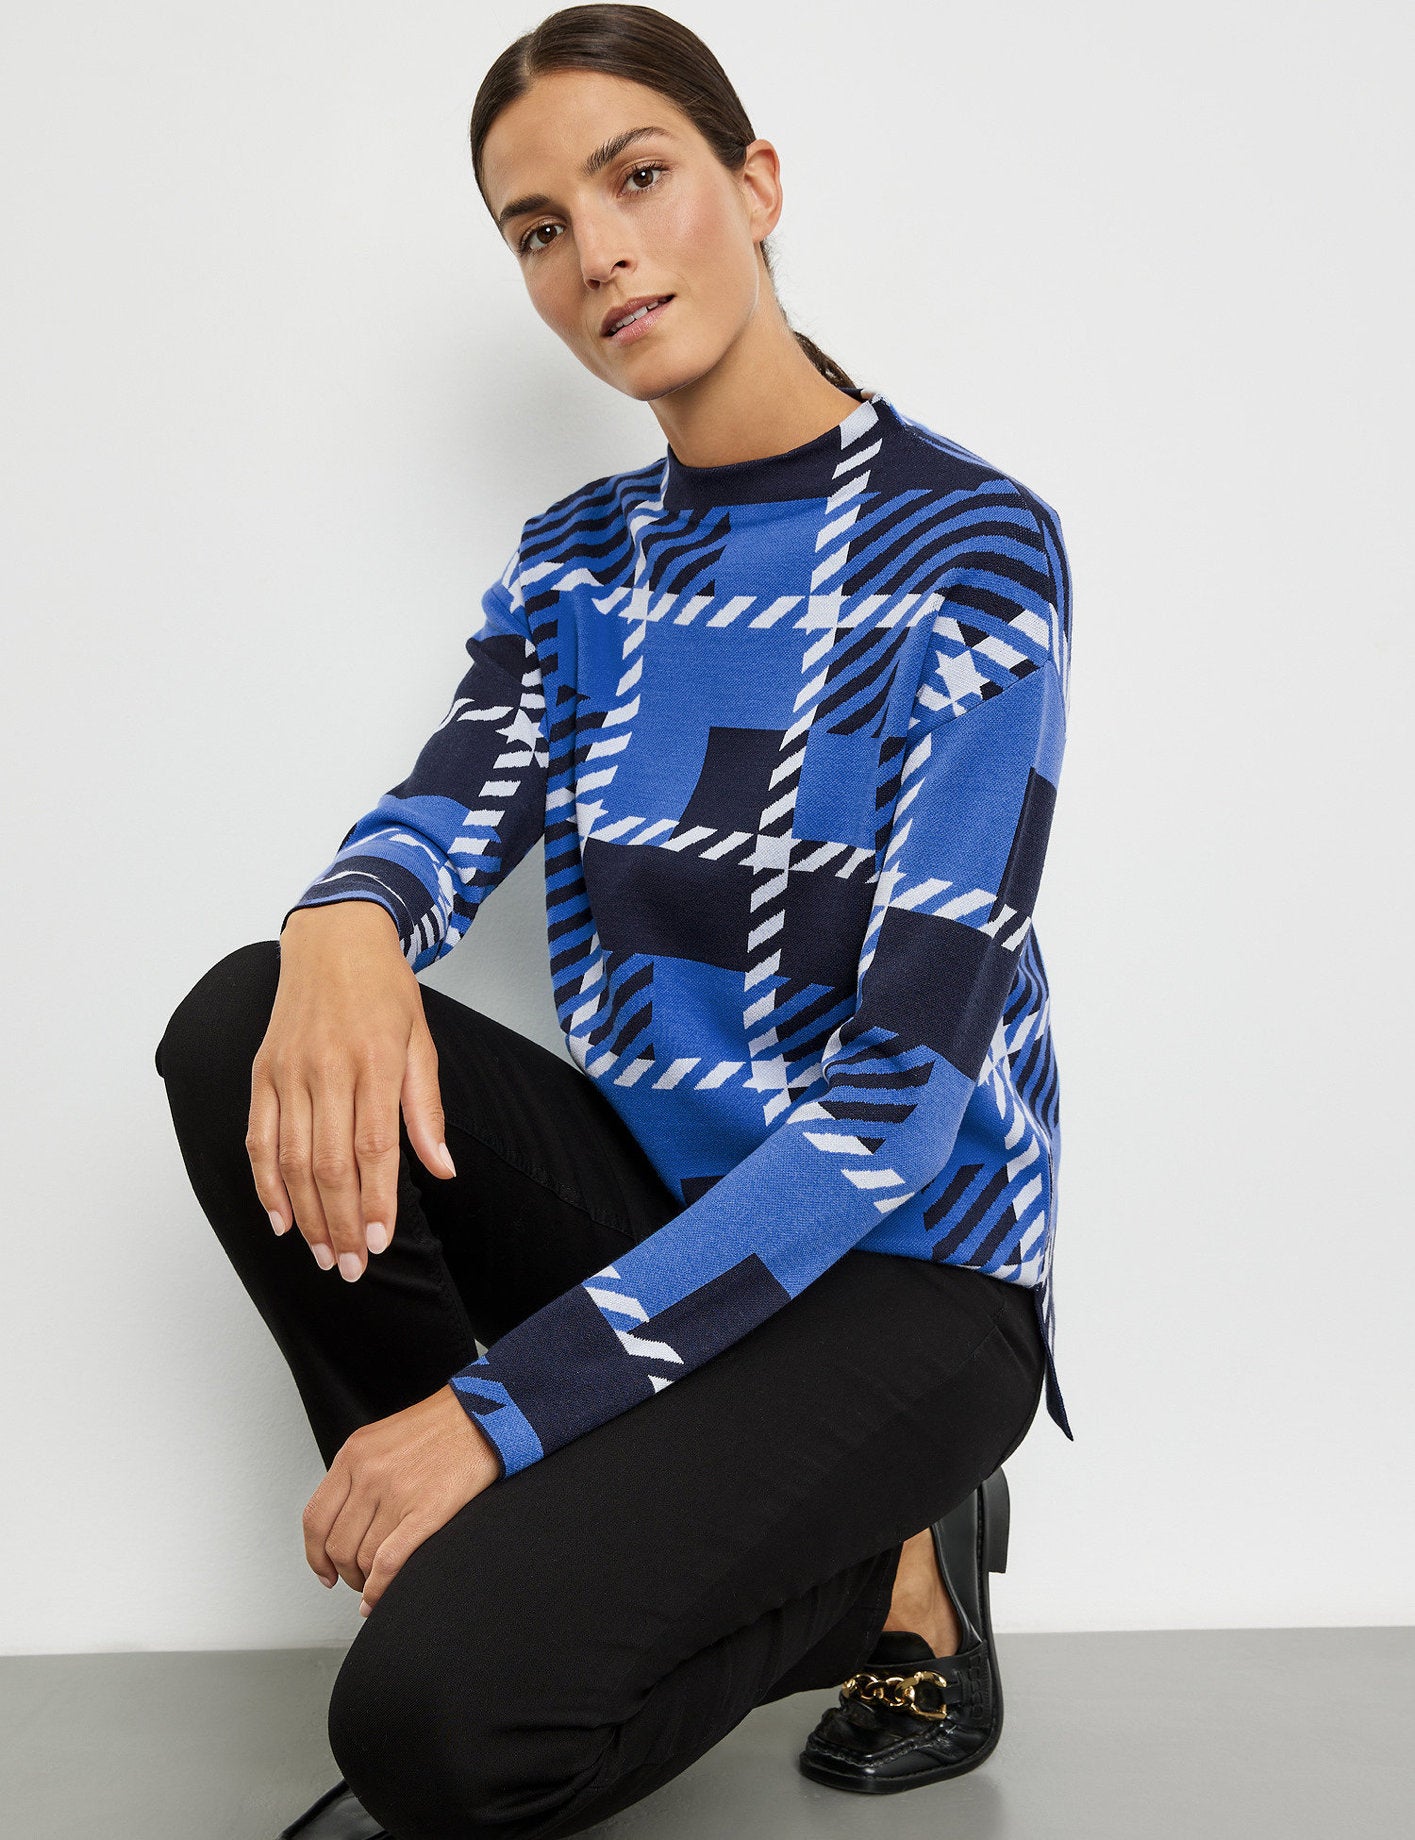 Fine Knit Jumper With An Elongated Back_271028-35701_8080_05